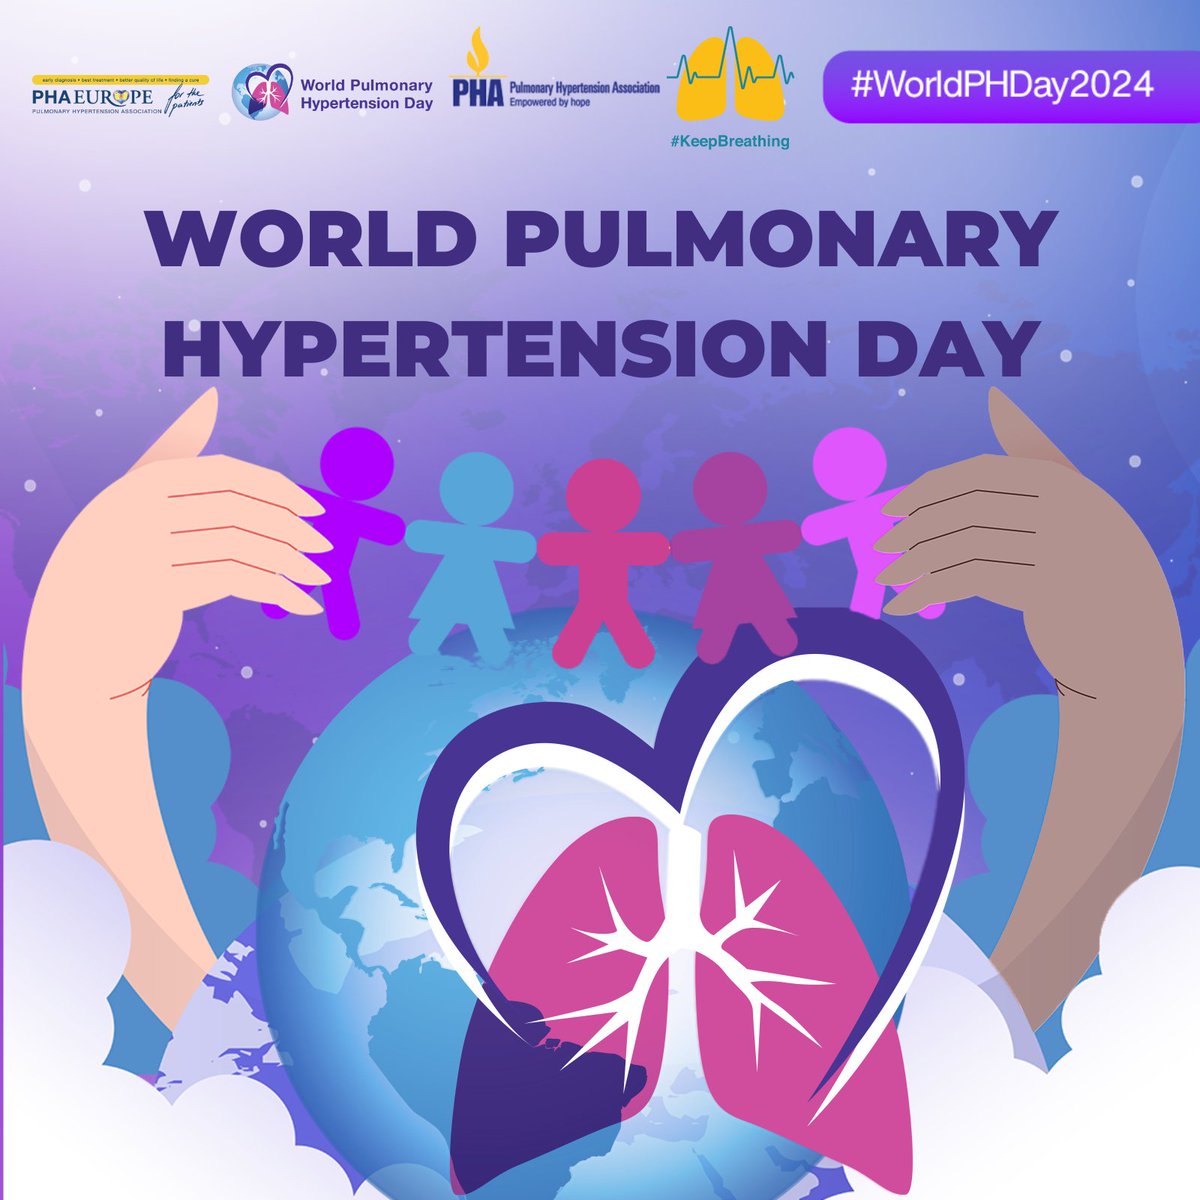 Today is #WorldPHDay2024! 🌍🎗️ #PH is a severe condition affecting the lungs and heart of patients worldwide. We stand together for better access to PH diagnosis, treatment, and care for those affected to #KeepBreathing. Support our action this month➡ worldphday.org